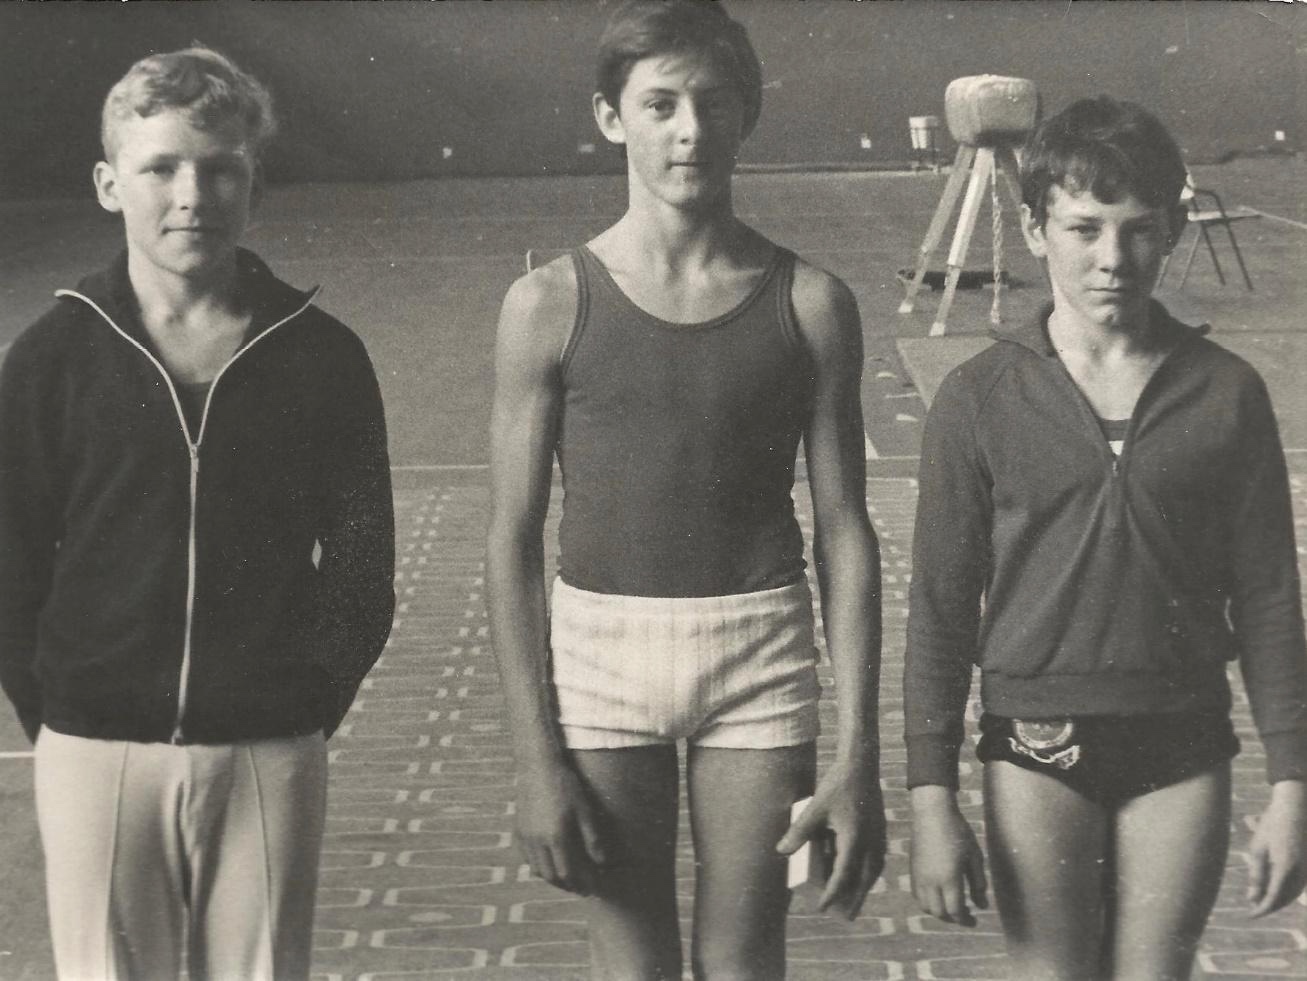 Jeff with Bob Stroud and Dave Urquhart when he was 2nd in the Vaulting & Floor work championships at Crystal Palace and 2nd in the tumbling to Dave Urquhart.